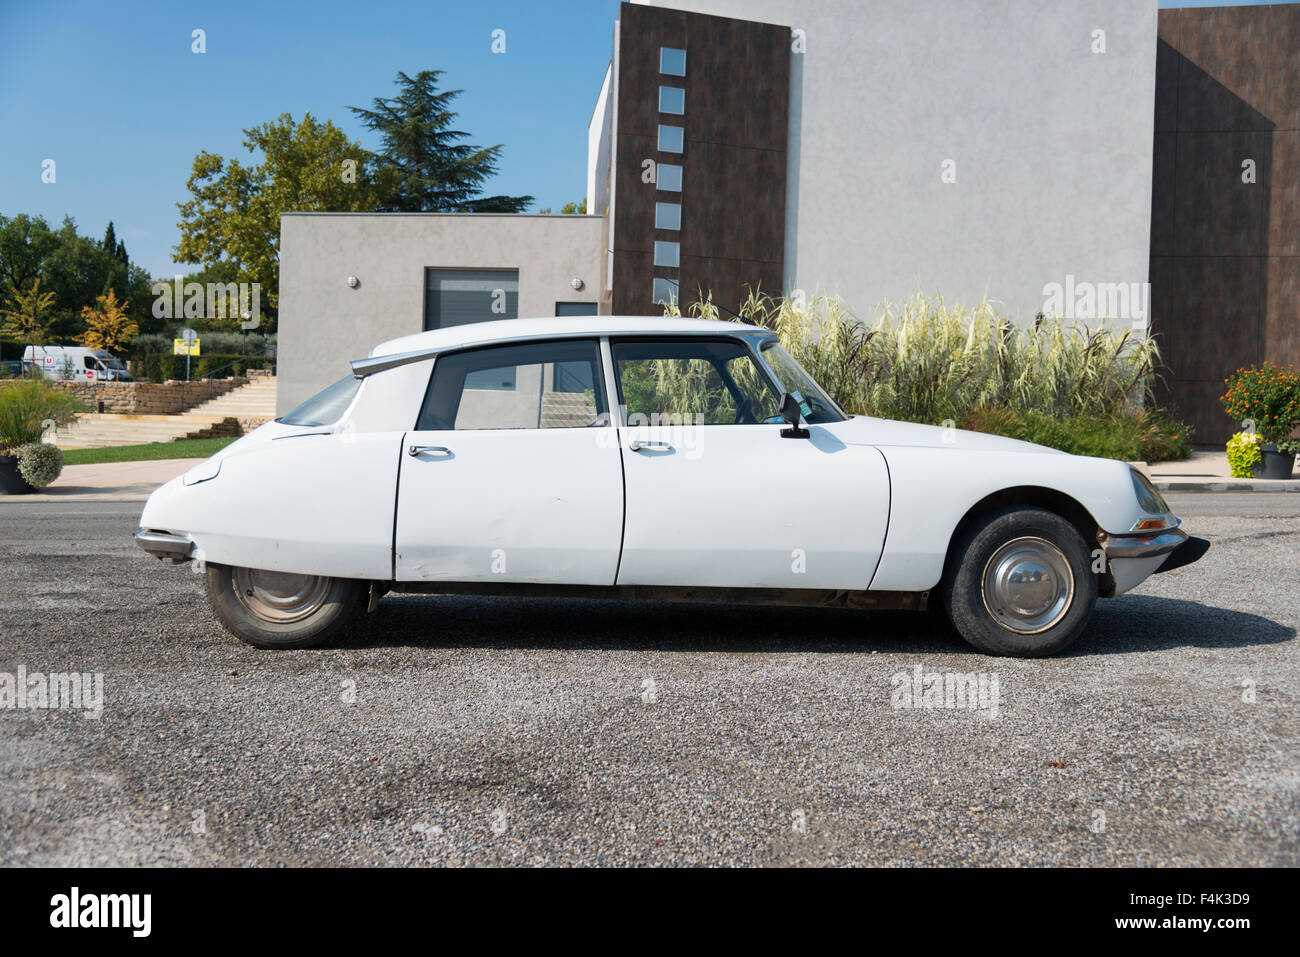 A Citroen DS vintage car parked in France Stock Photo